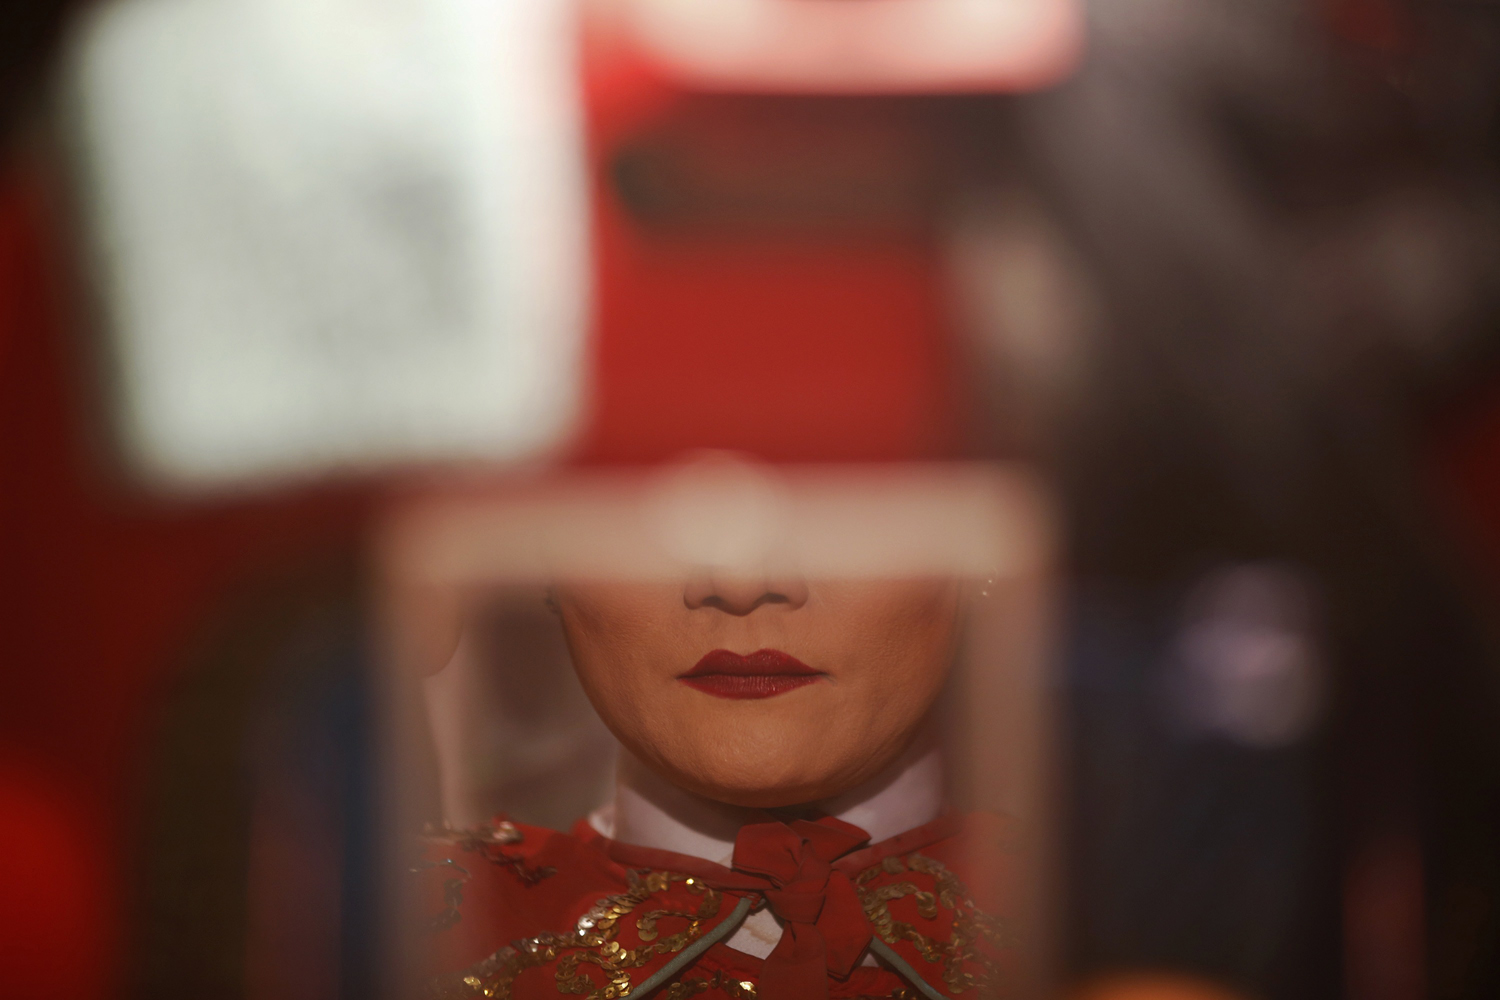 Image: Oct. 19, 2012. A Chinese opera actress is reflected in a mirror before performing outside a shrine during the annual vegetarian festival in Phuket, Thailand. The festival celebrates the local Chinese community's belief that abstinence from meat and various stimulants during the ninth lunar month of the Chinese calendar will help them obtain good health and peace of mind.